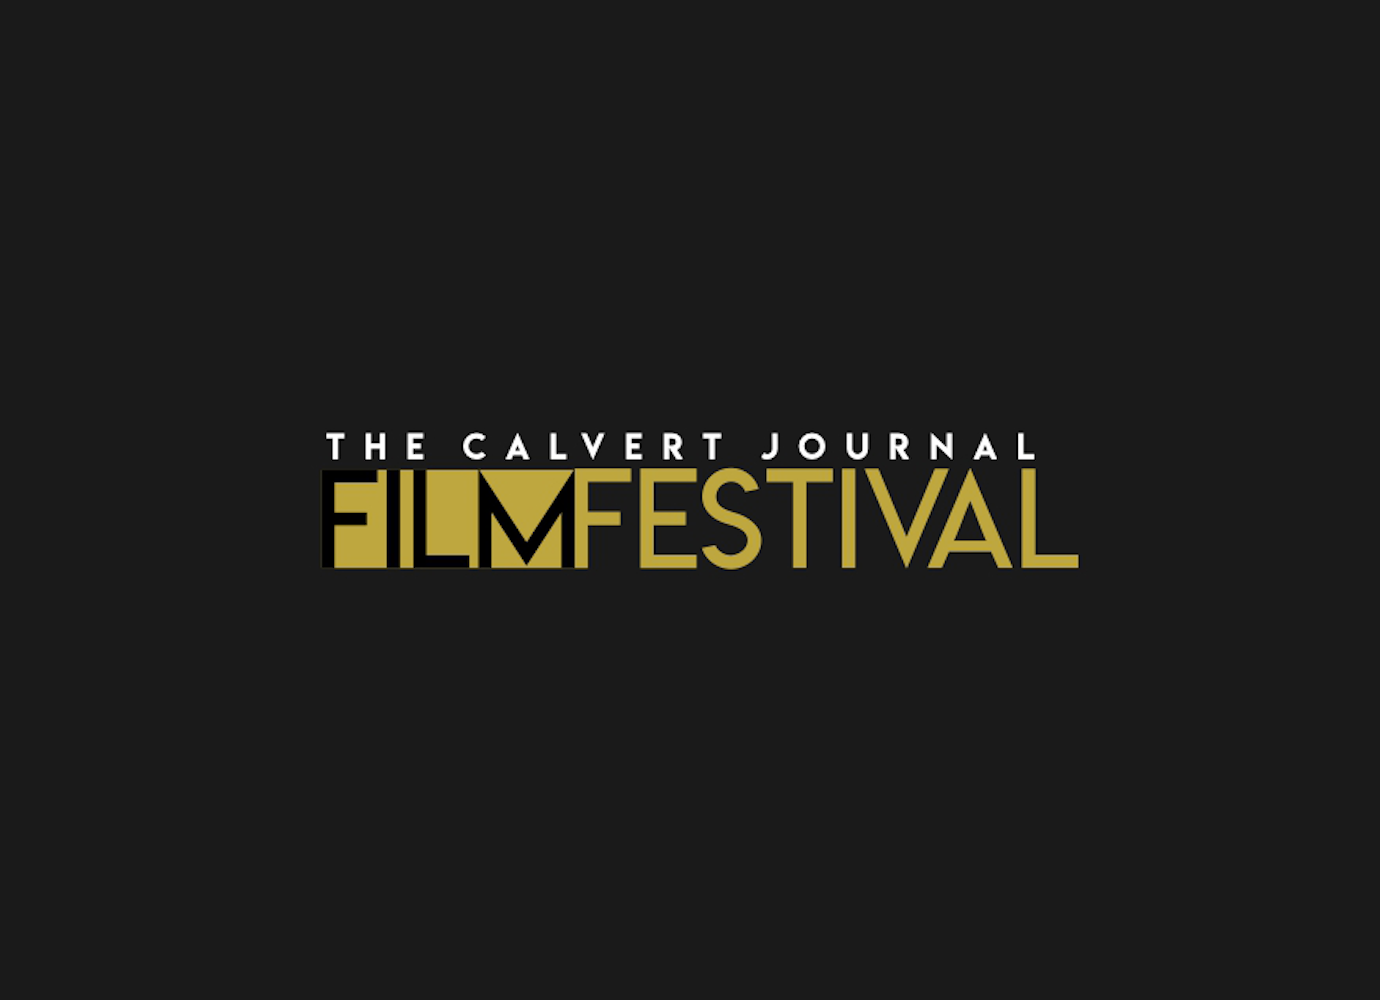 Submissions now open for The Calvert Journal Film Festival 2021